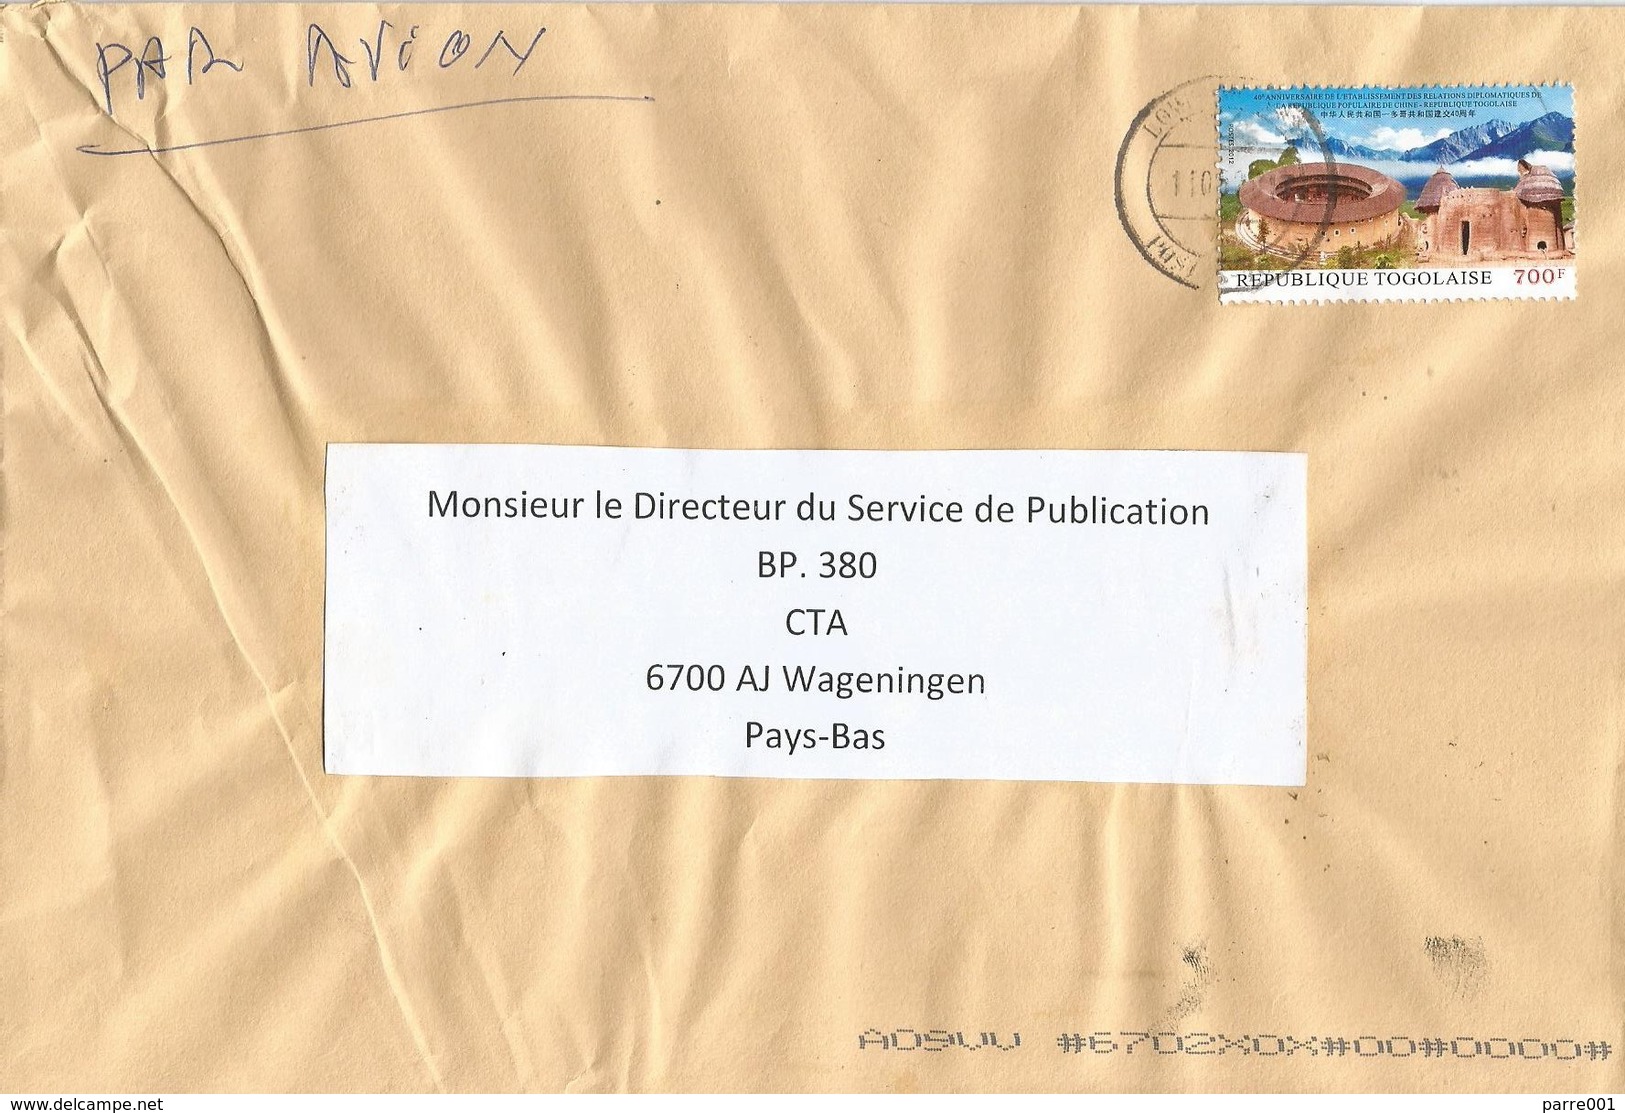 Togo 2017 Lome China Cooperation Walled House 700f Cover - Emissions Communes